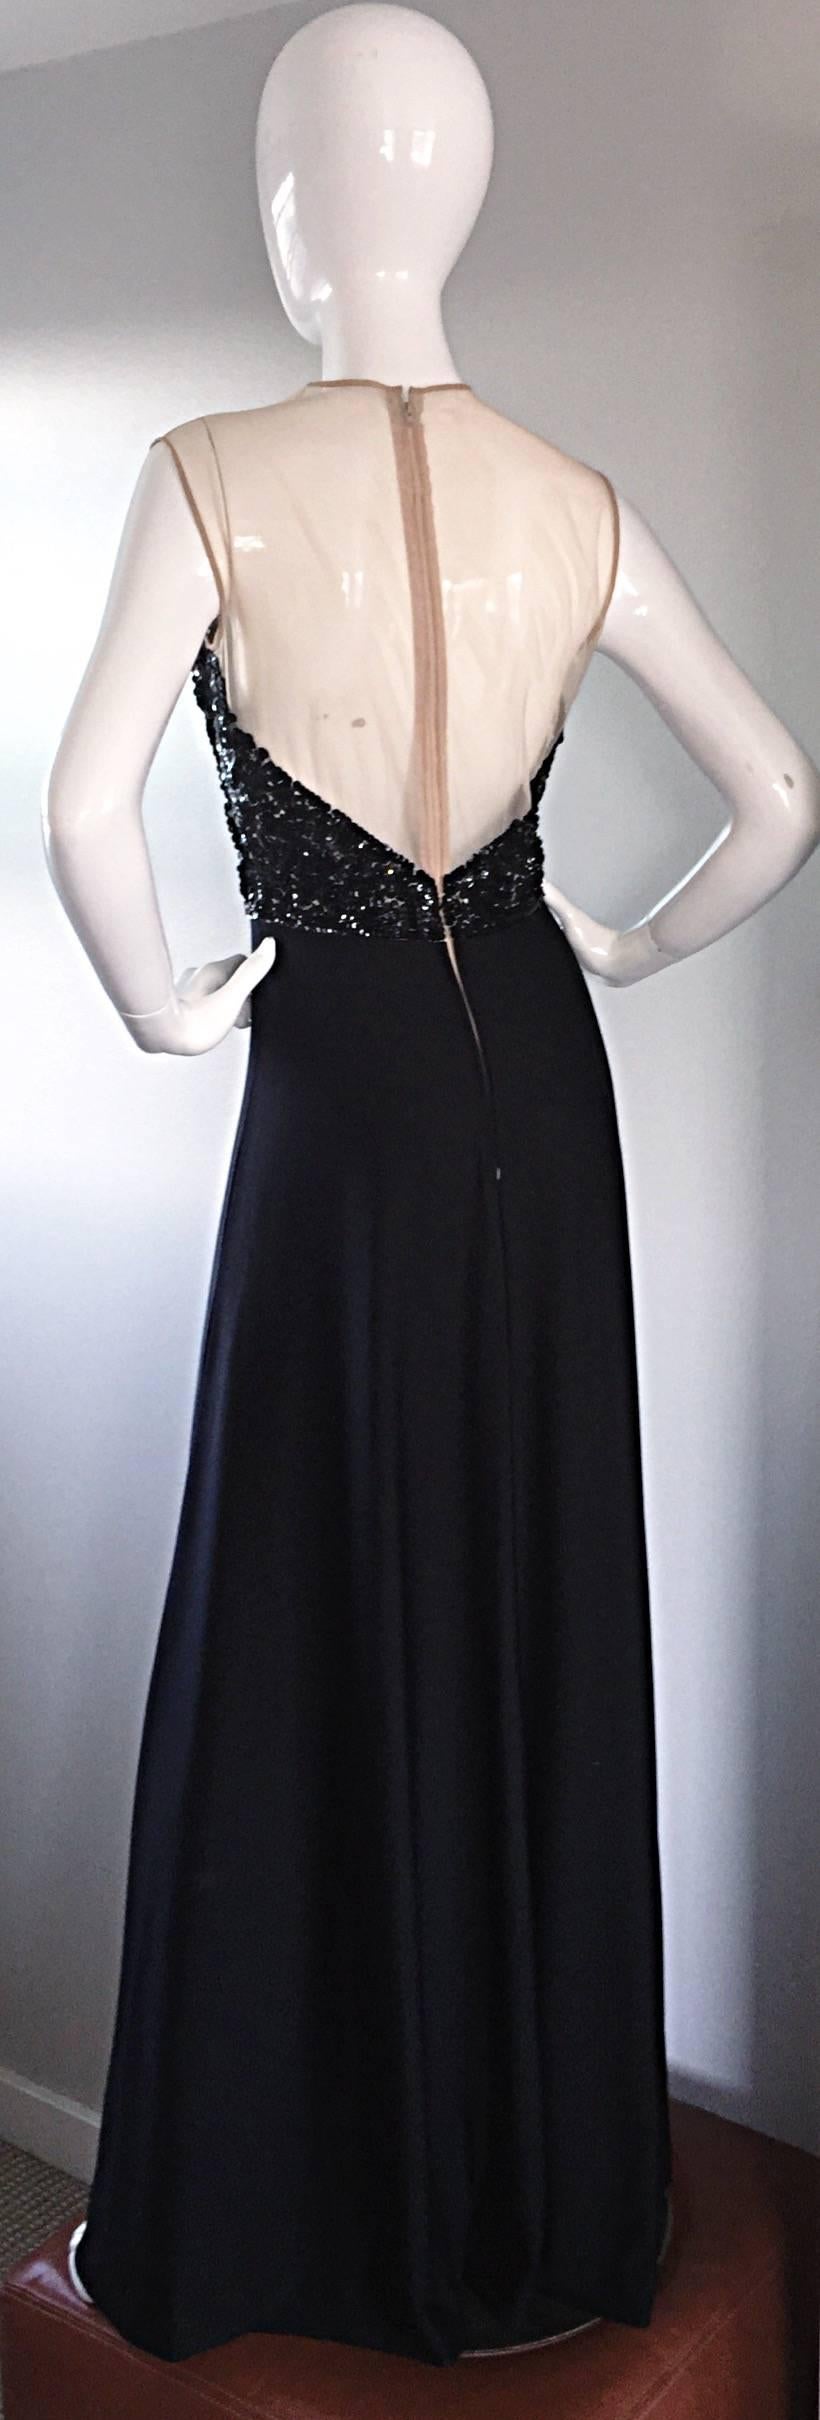 Incredible 1970s Mr. Blackwell Vintage Nude Illusion Sequin Couture Black Gown  In Excellent Condition For Sale In San Diego, CA